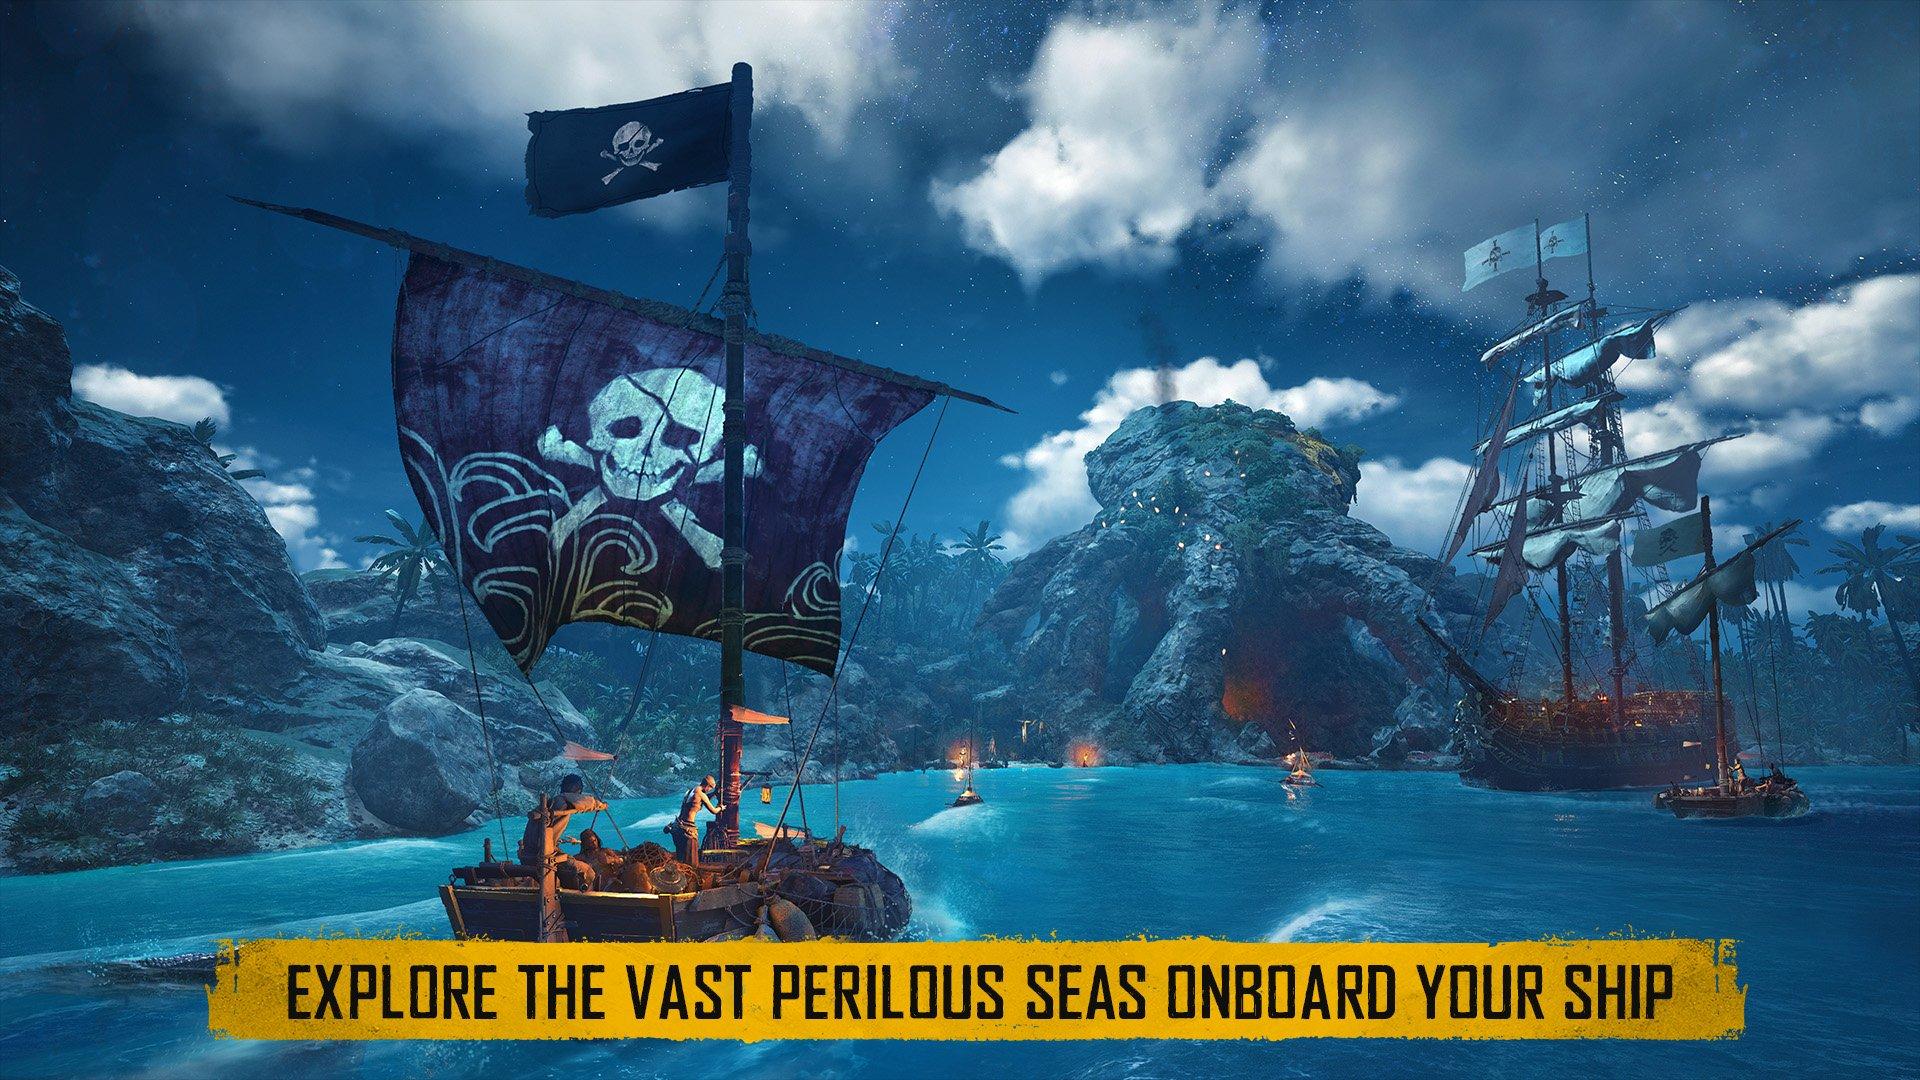 Skull & Bones has already been on Steam for years before Epic Games Store  existed, but now they are only releasing the game via Epic Exclusive/Ubi  Connect, pretty sure this broke against